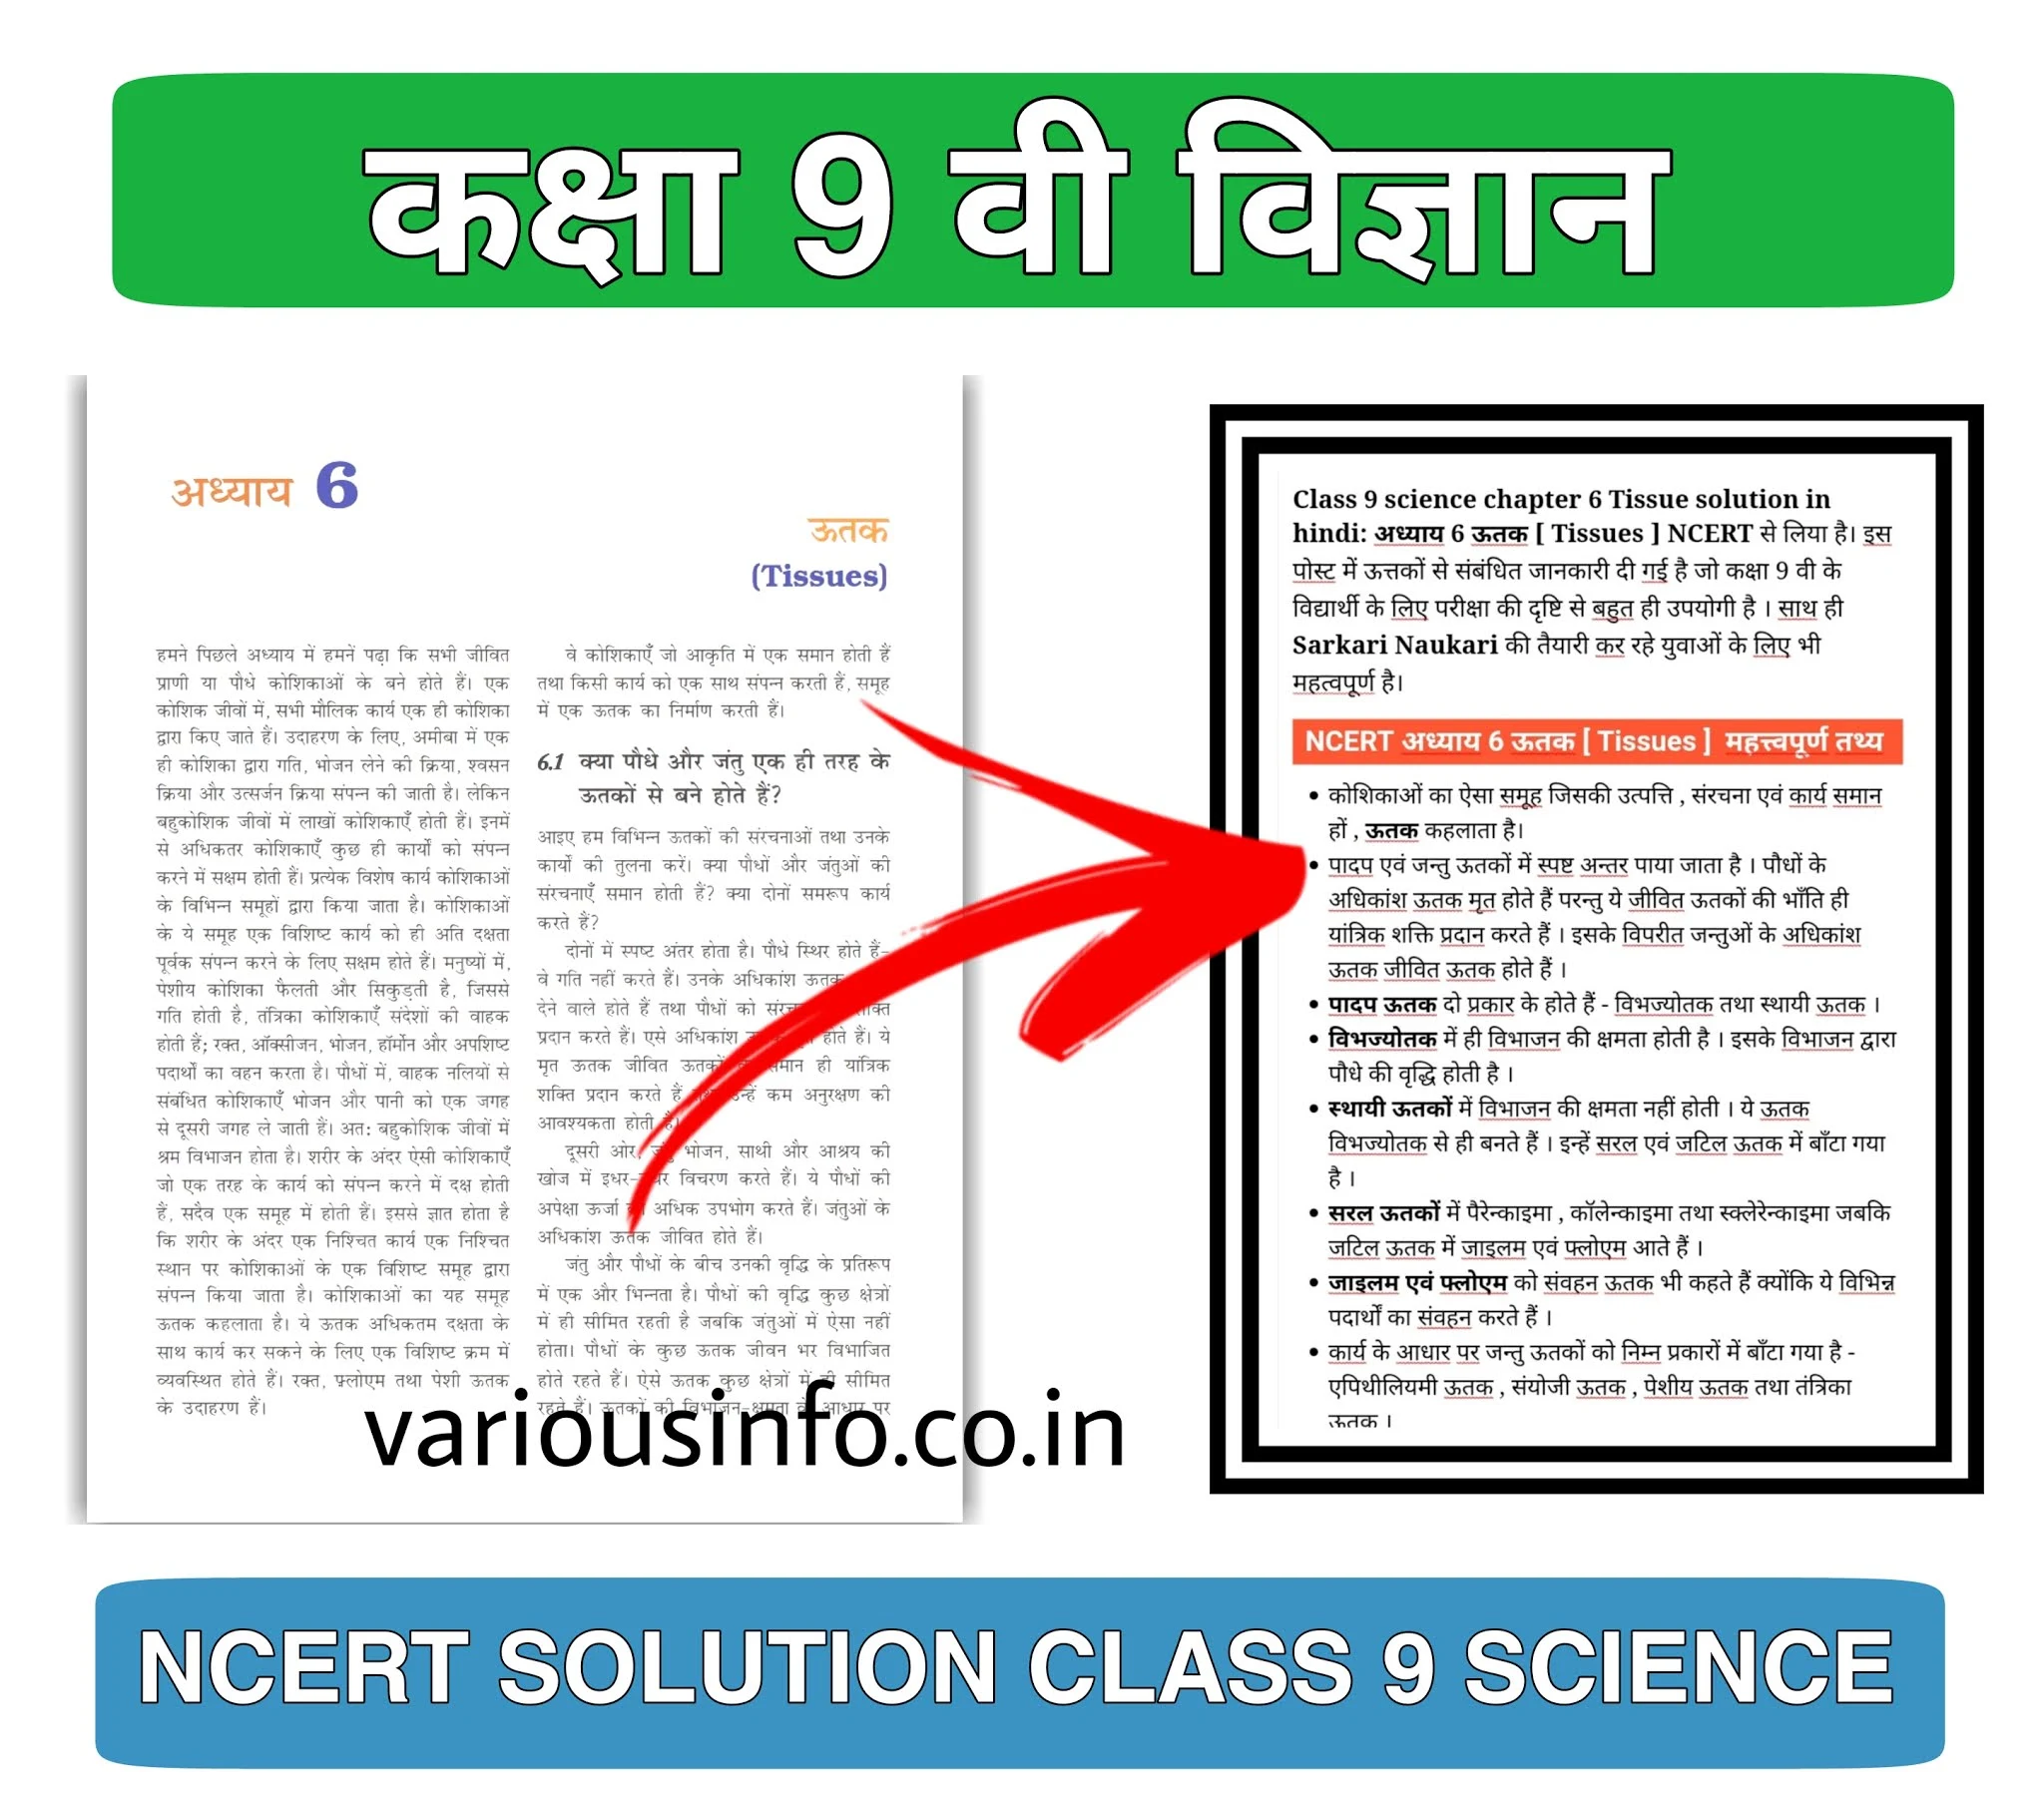 Ncert solution Class 9 Science Chapter 6 Question answer in Hindi Class 9 Science Chapter 6 Extra Questions and Answers NCERT Class 9 Science Chapter 6 PDF download , CH 6 Science Class 9 Notes PDF Q Class 9 Chapter 5 the Tissues Class 9 Worksheet with Answers 9th class Science chapter 6 , NCERT Solutions for Class 9 Science Chapter 6 in hindi solution